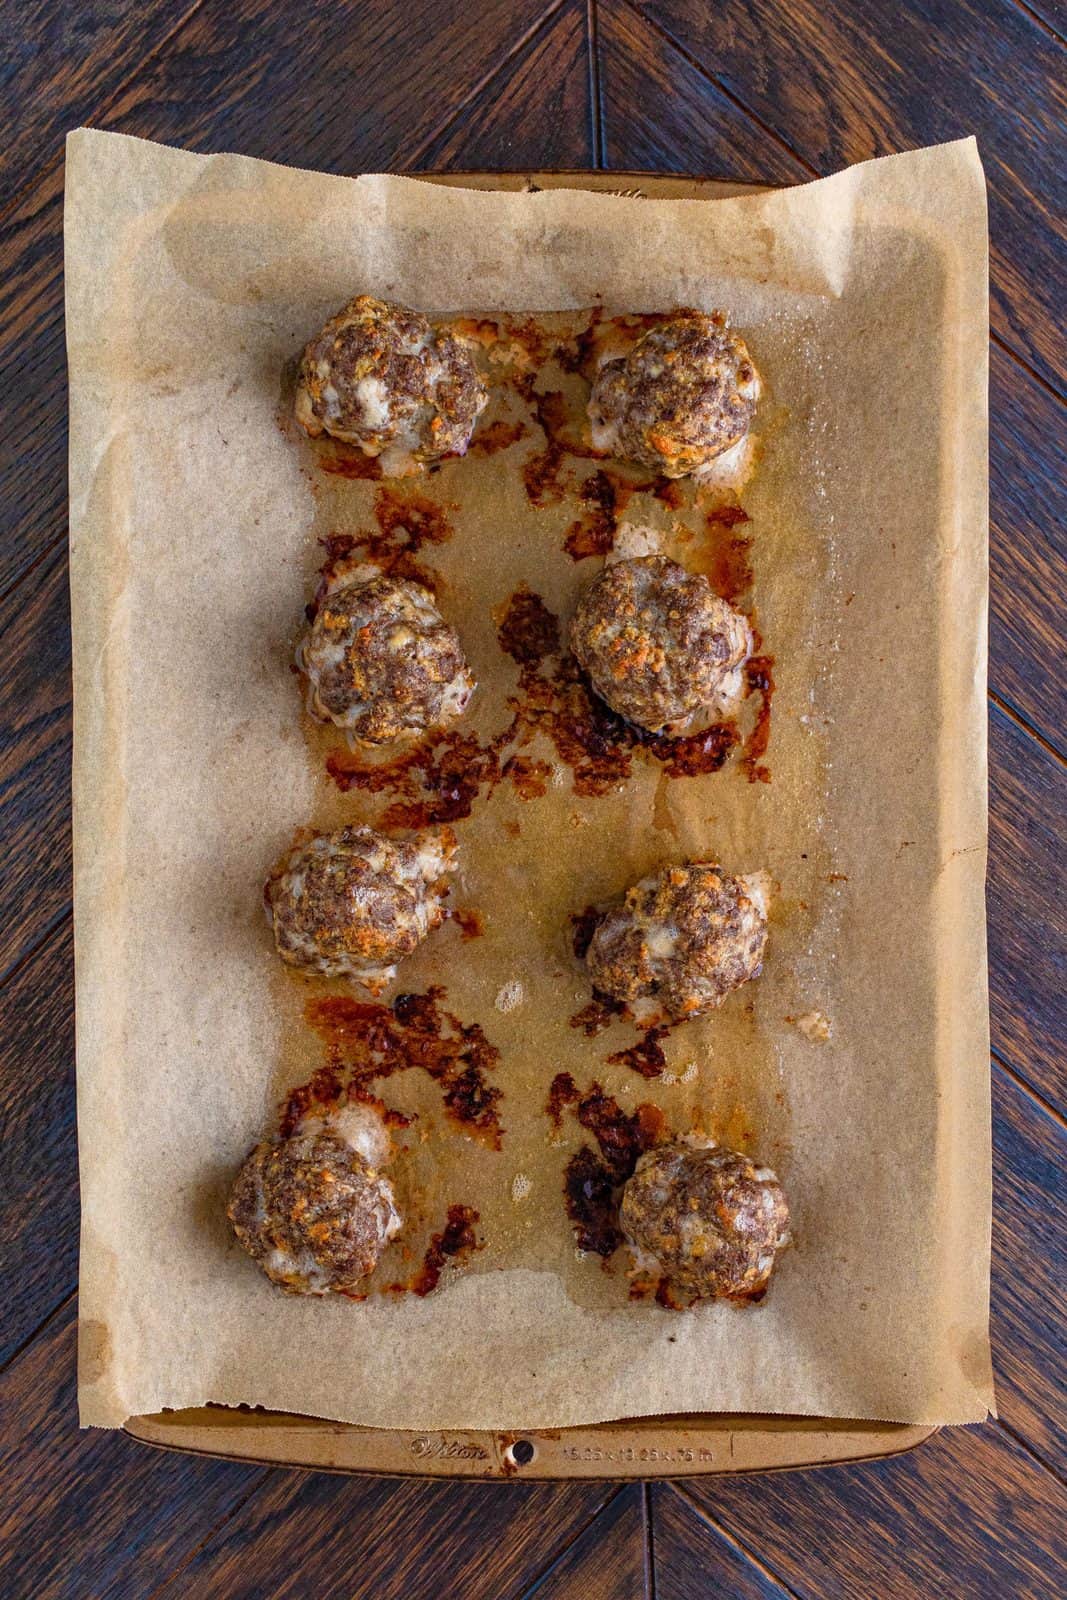 Finished meatballs out of oven on parchment lined pan.